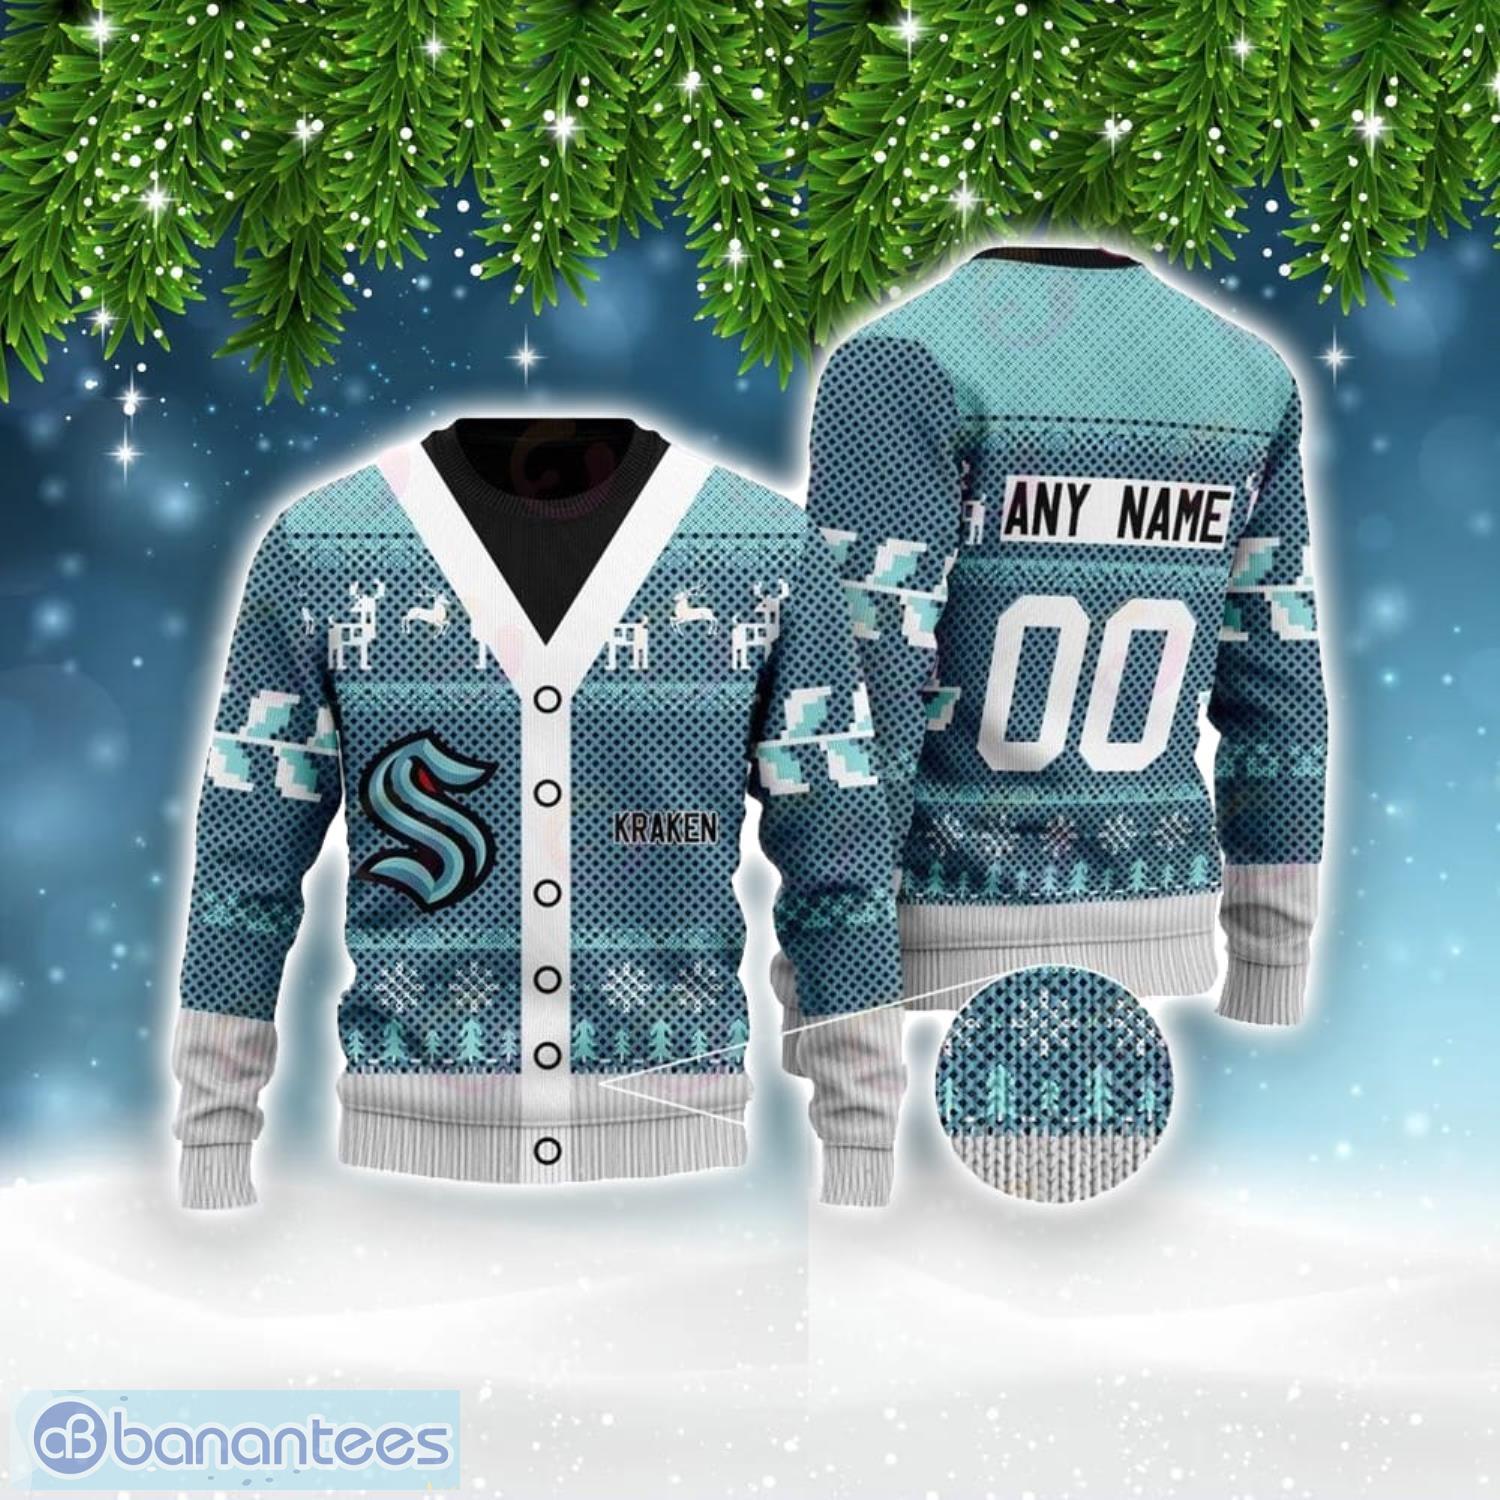 Kraken dye sublimated custom hockey jersey. You can customize with your  name and number!